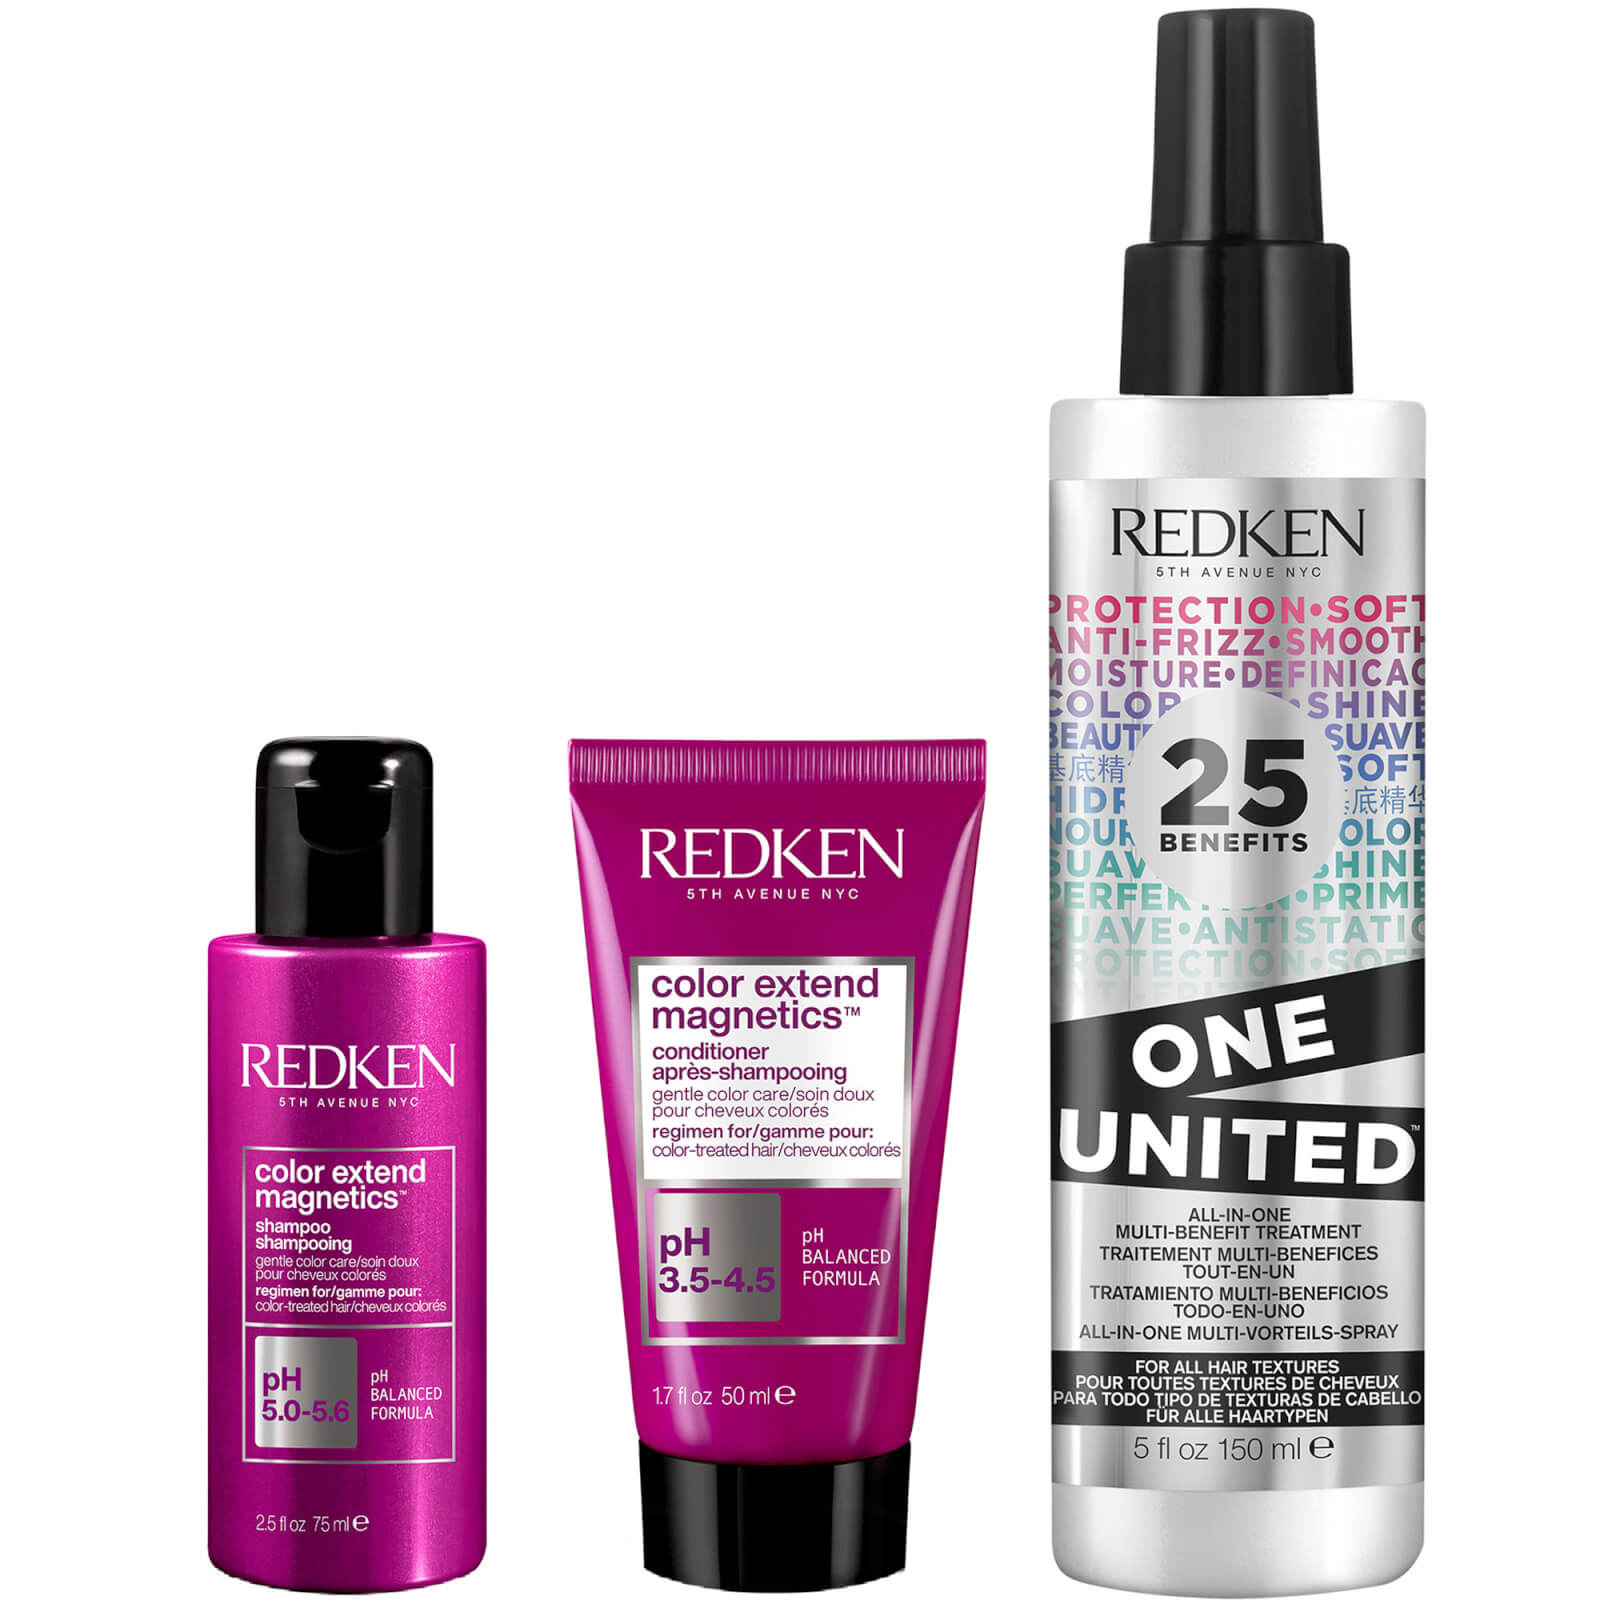 Redken Color Extend Magnetics Shampoo and Conditioner with One United Routine Bundle for Colour Trea